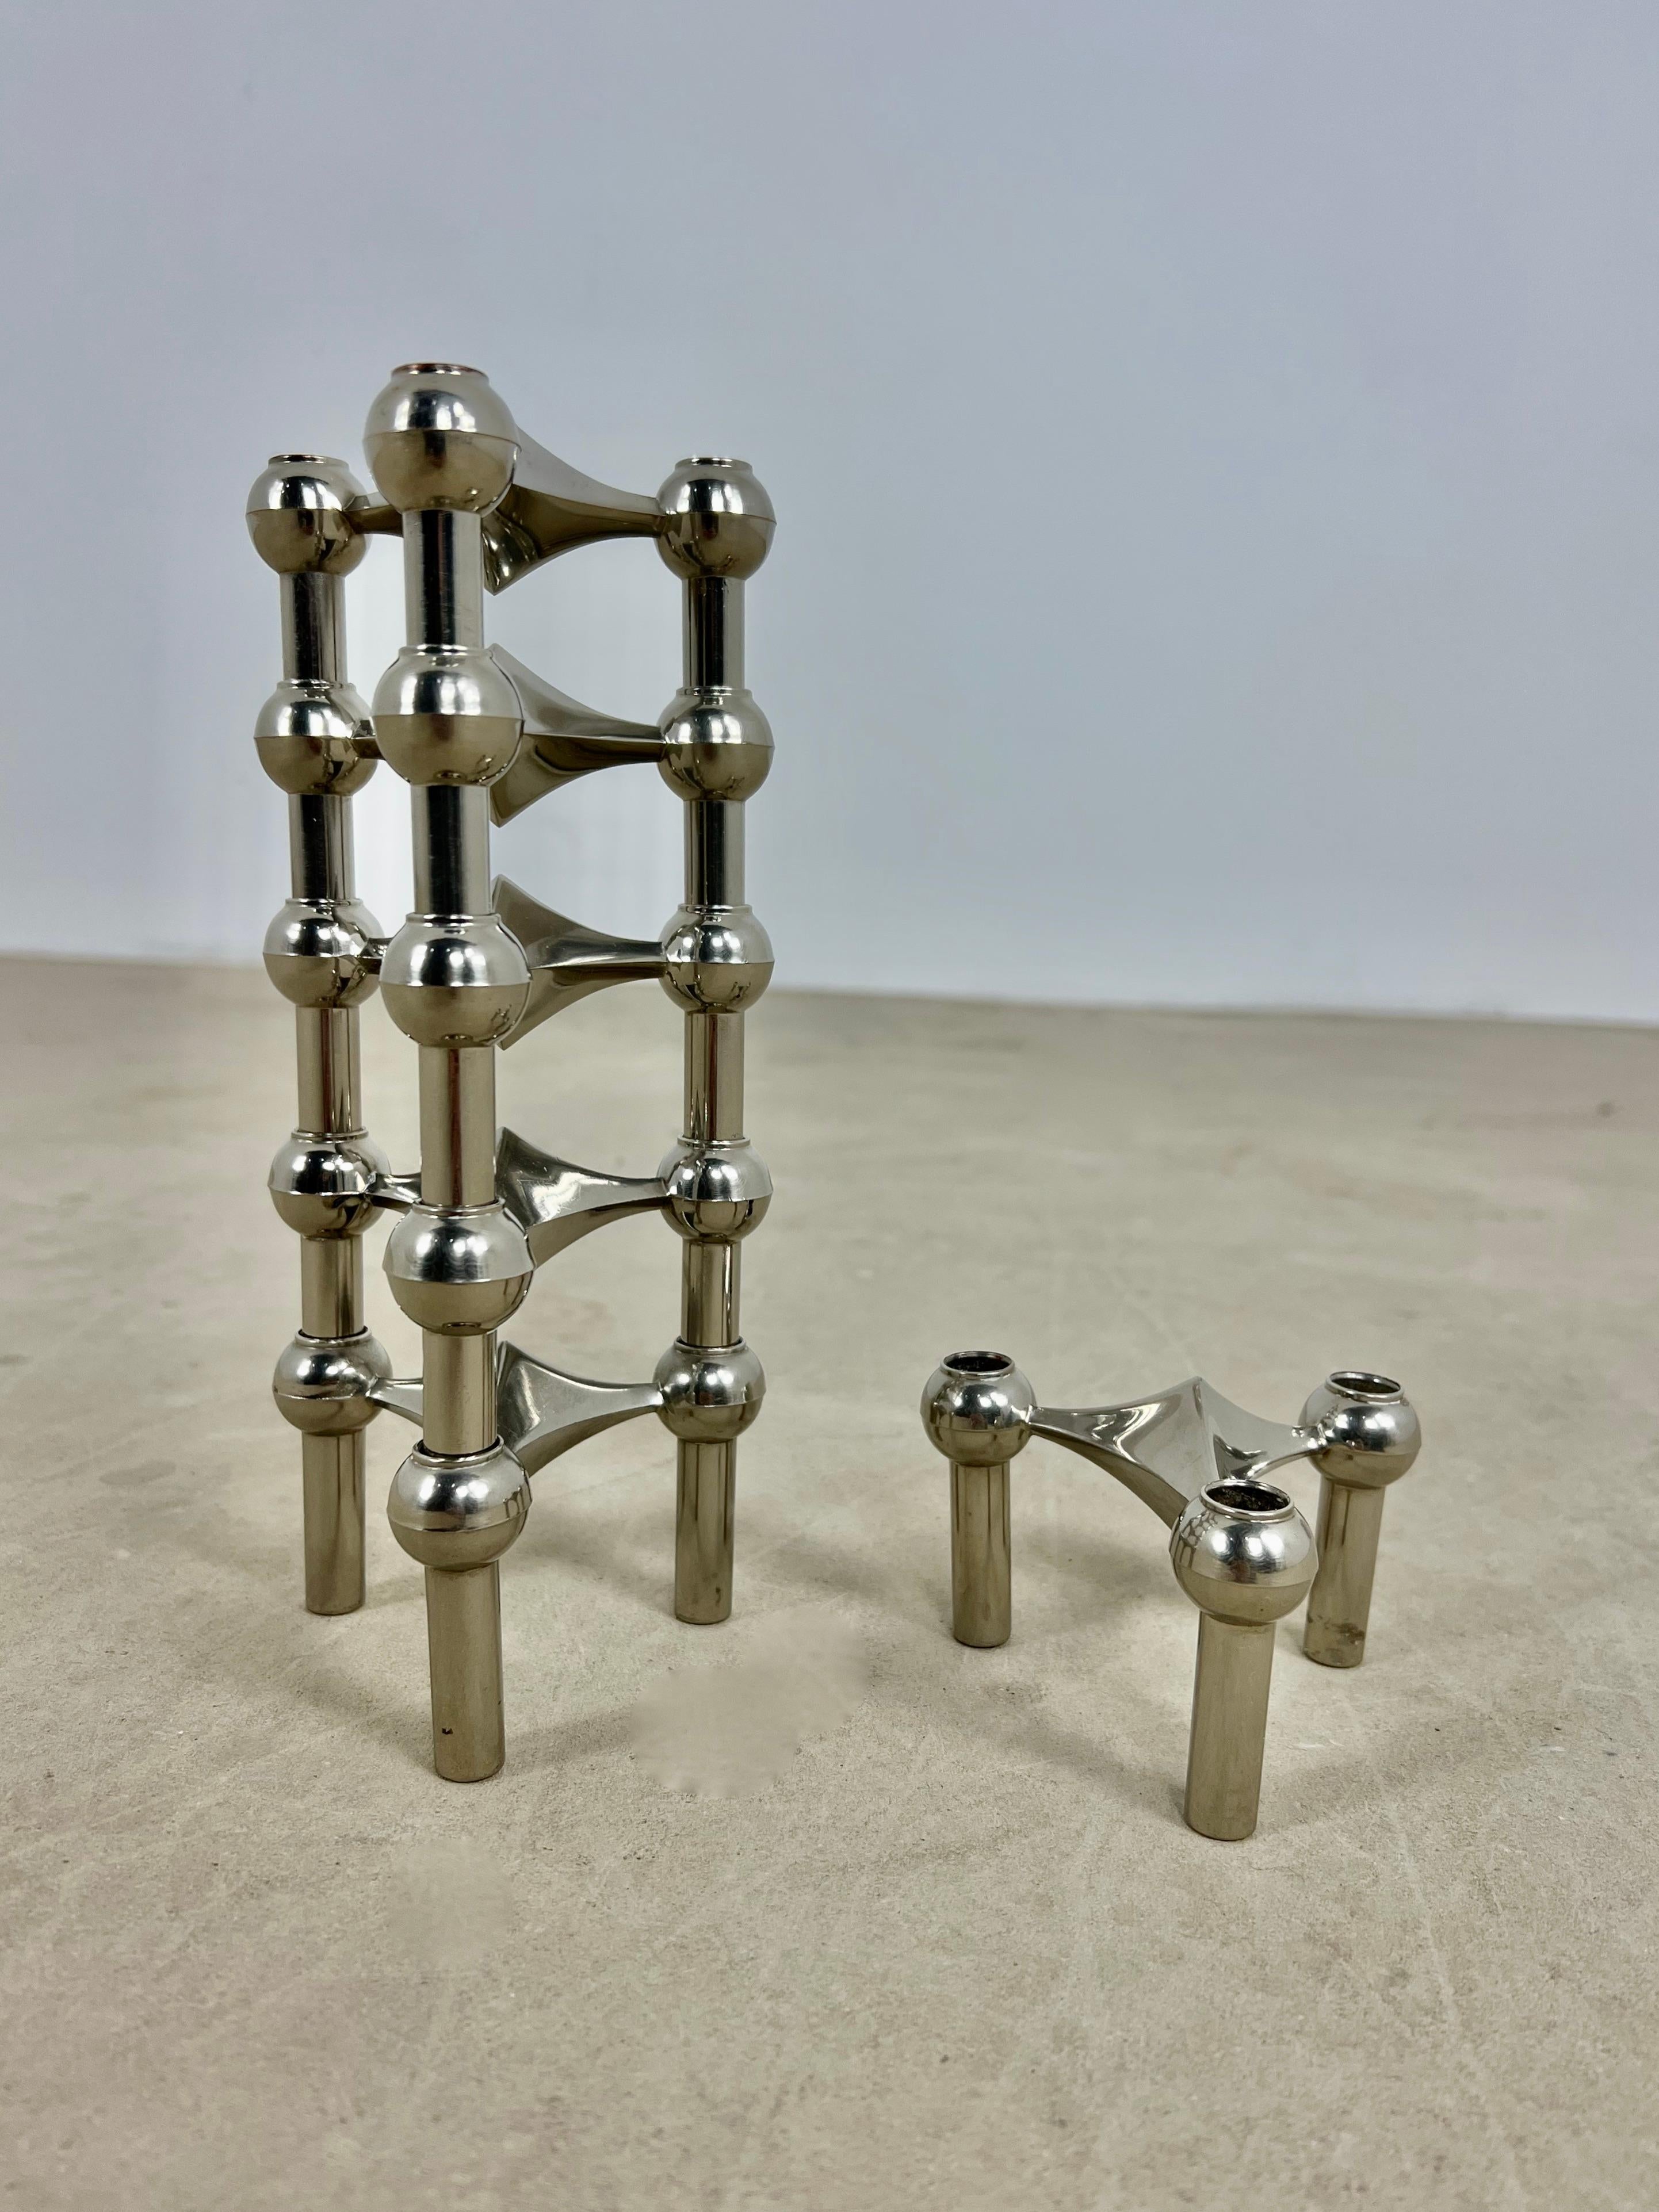 Set of 6 candlesticks in chromed metal. Wear due to time and age of candle holders.